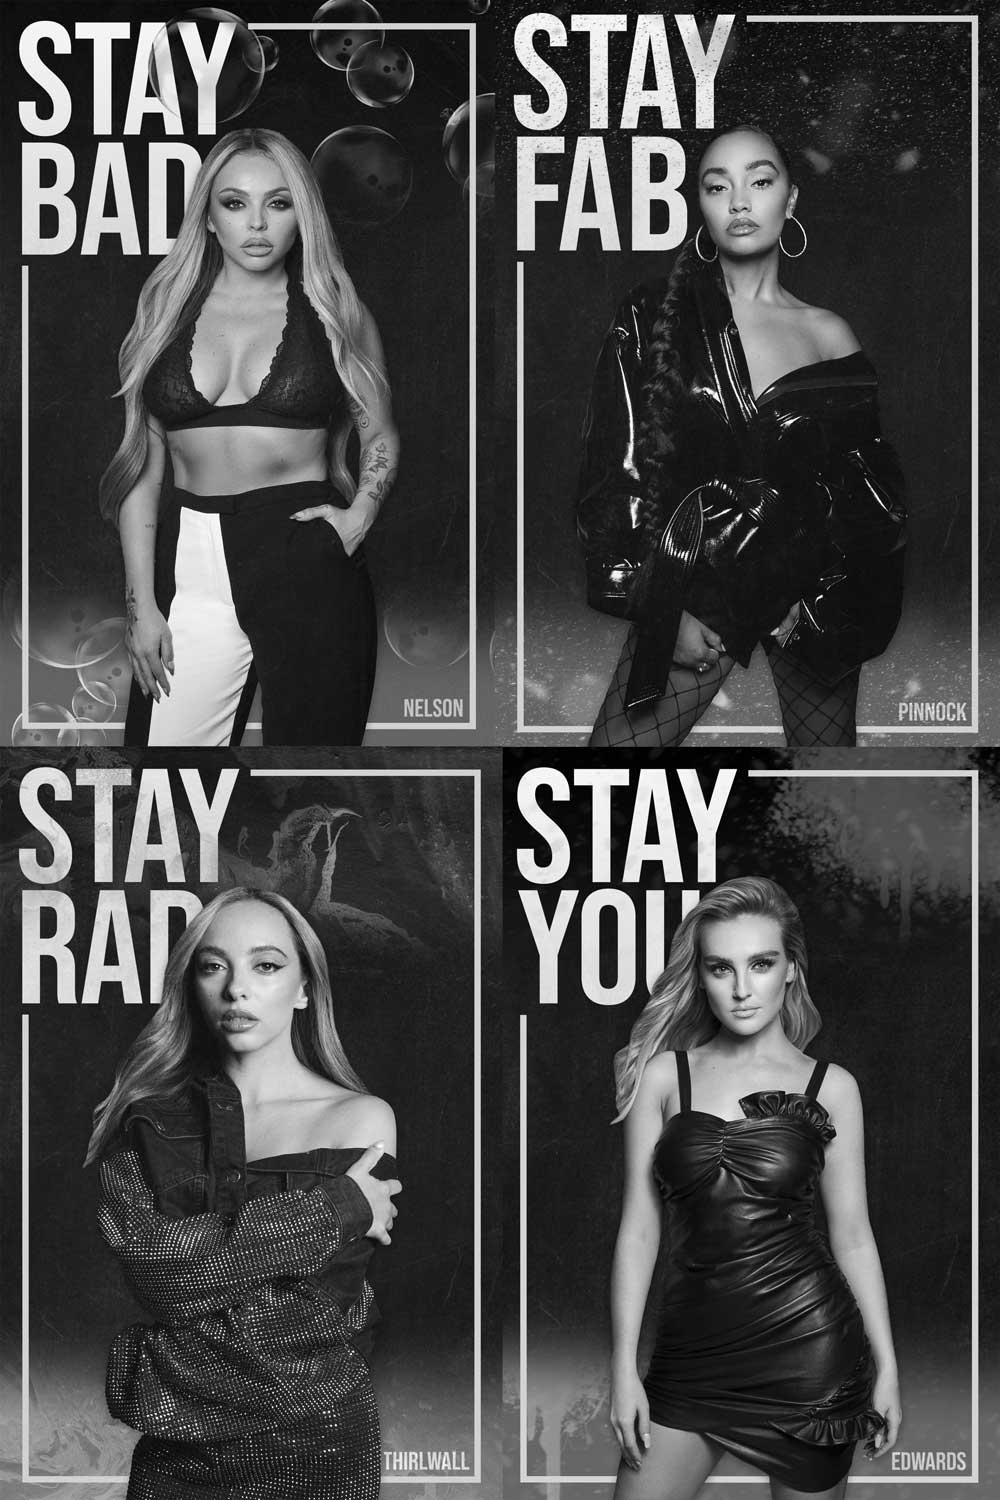 This is an image of 4 posters. It was a random concept I tried that includes the 4 members of a girl group called Little Mix